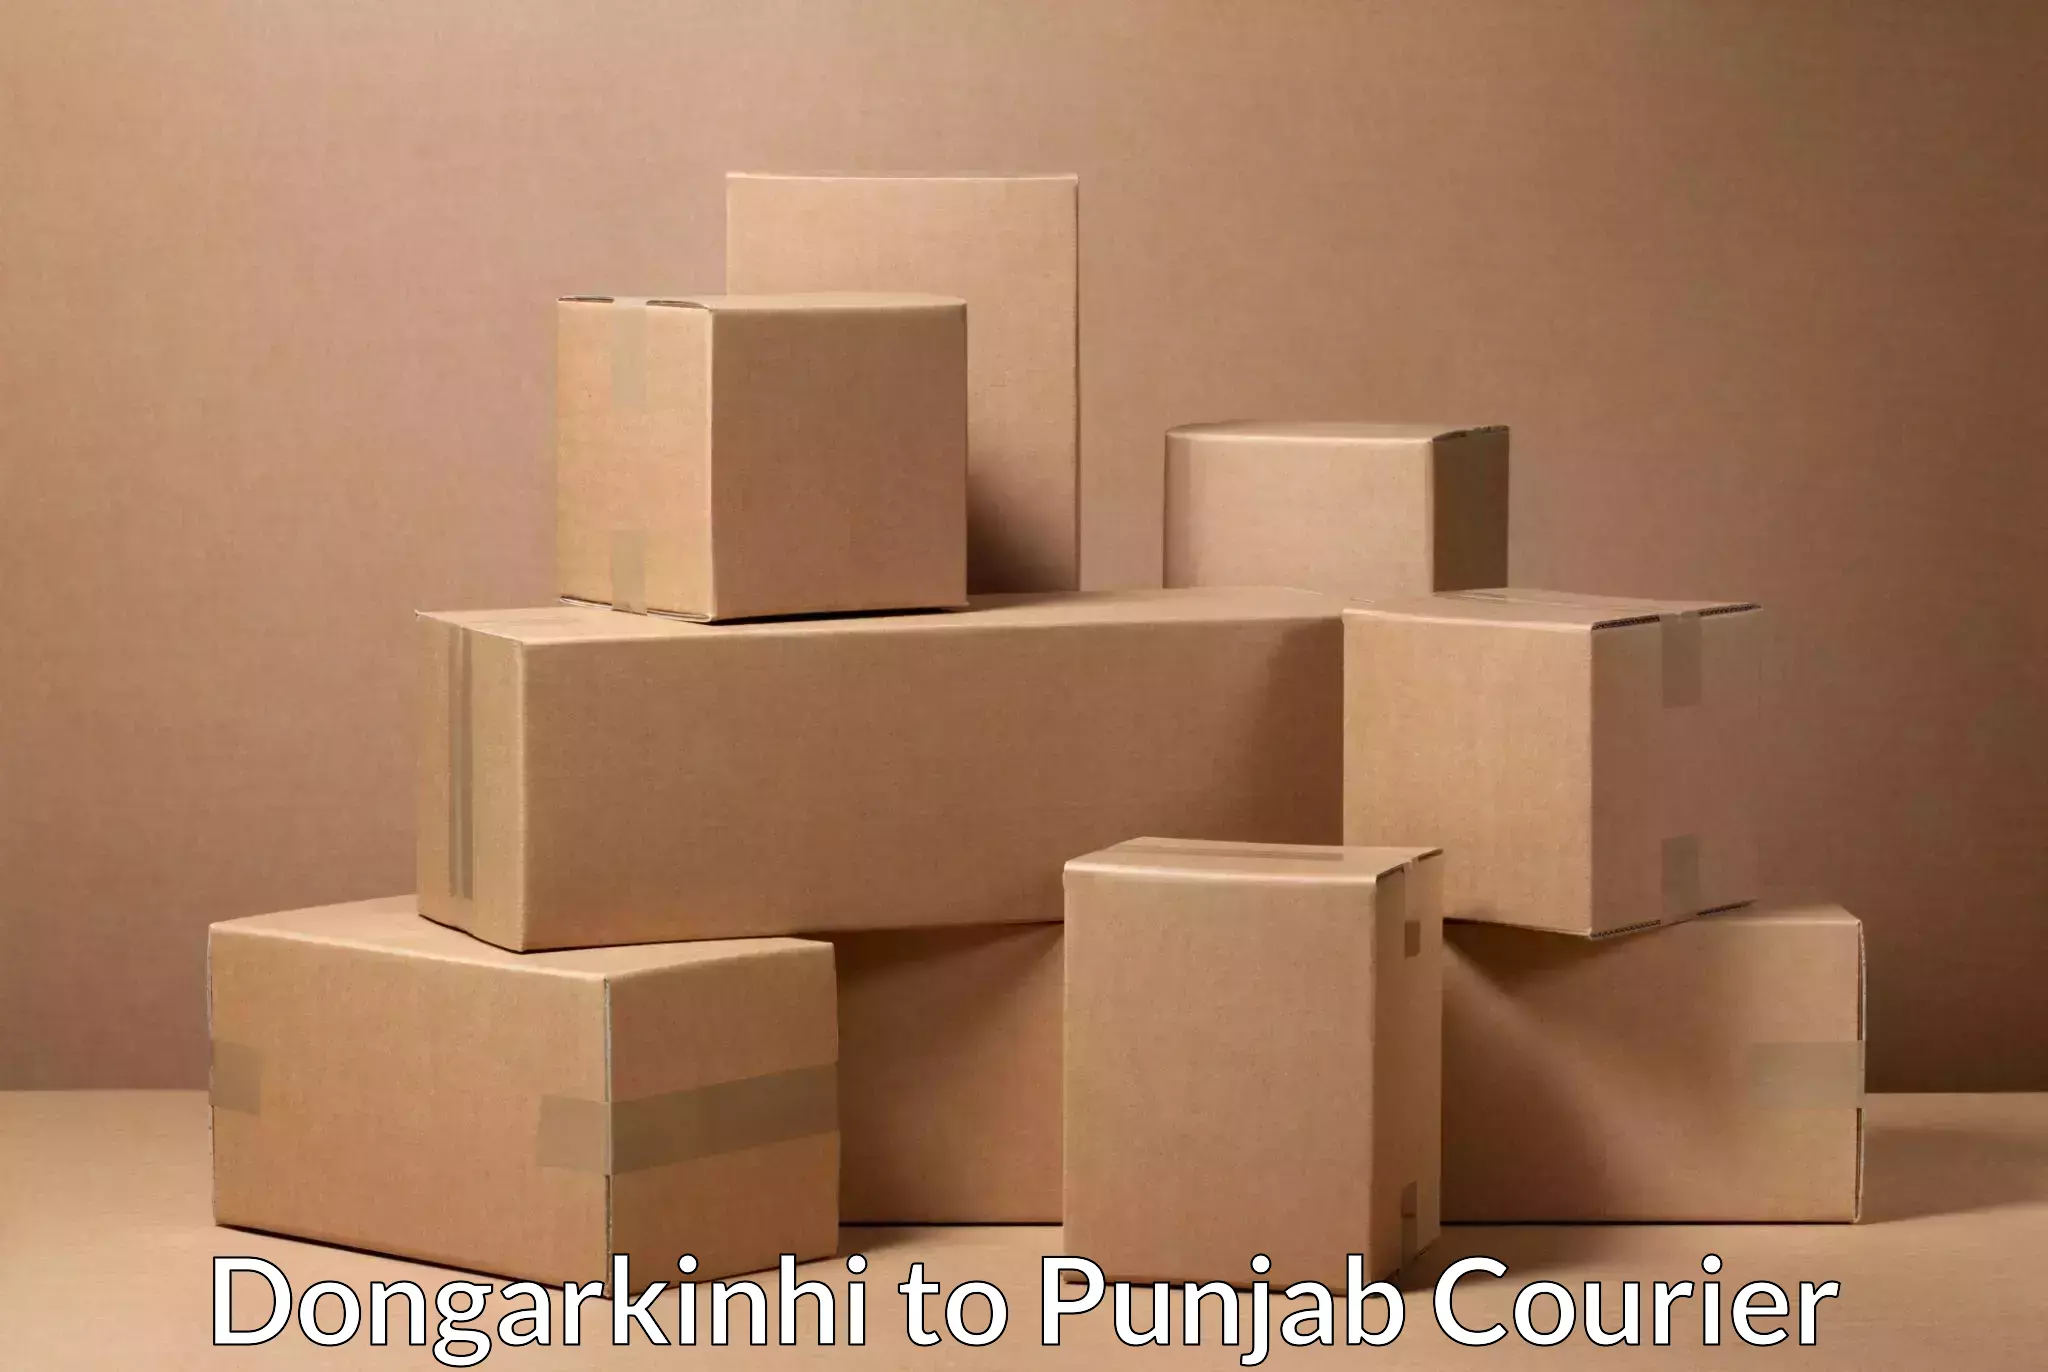 Courier service comparison in Dongarkinhi to IIT Ropar